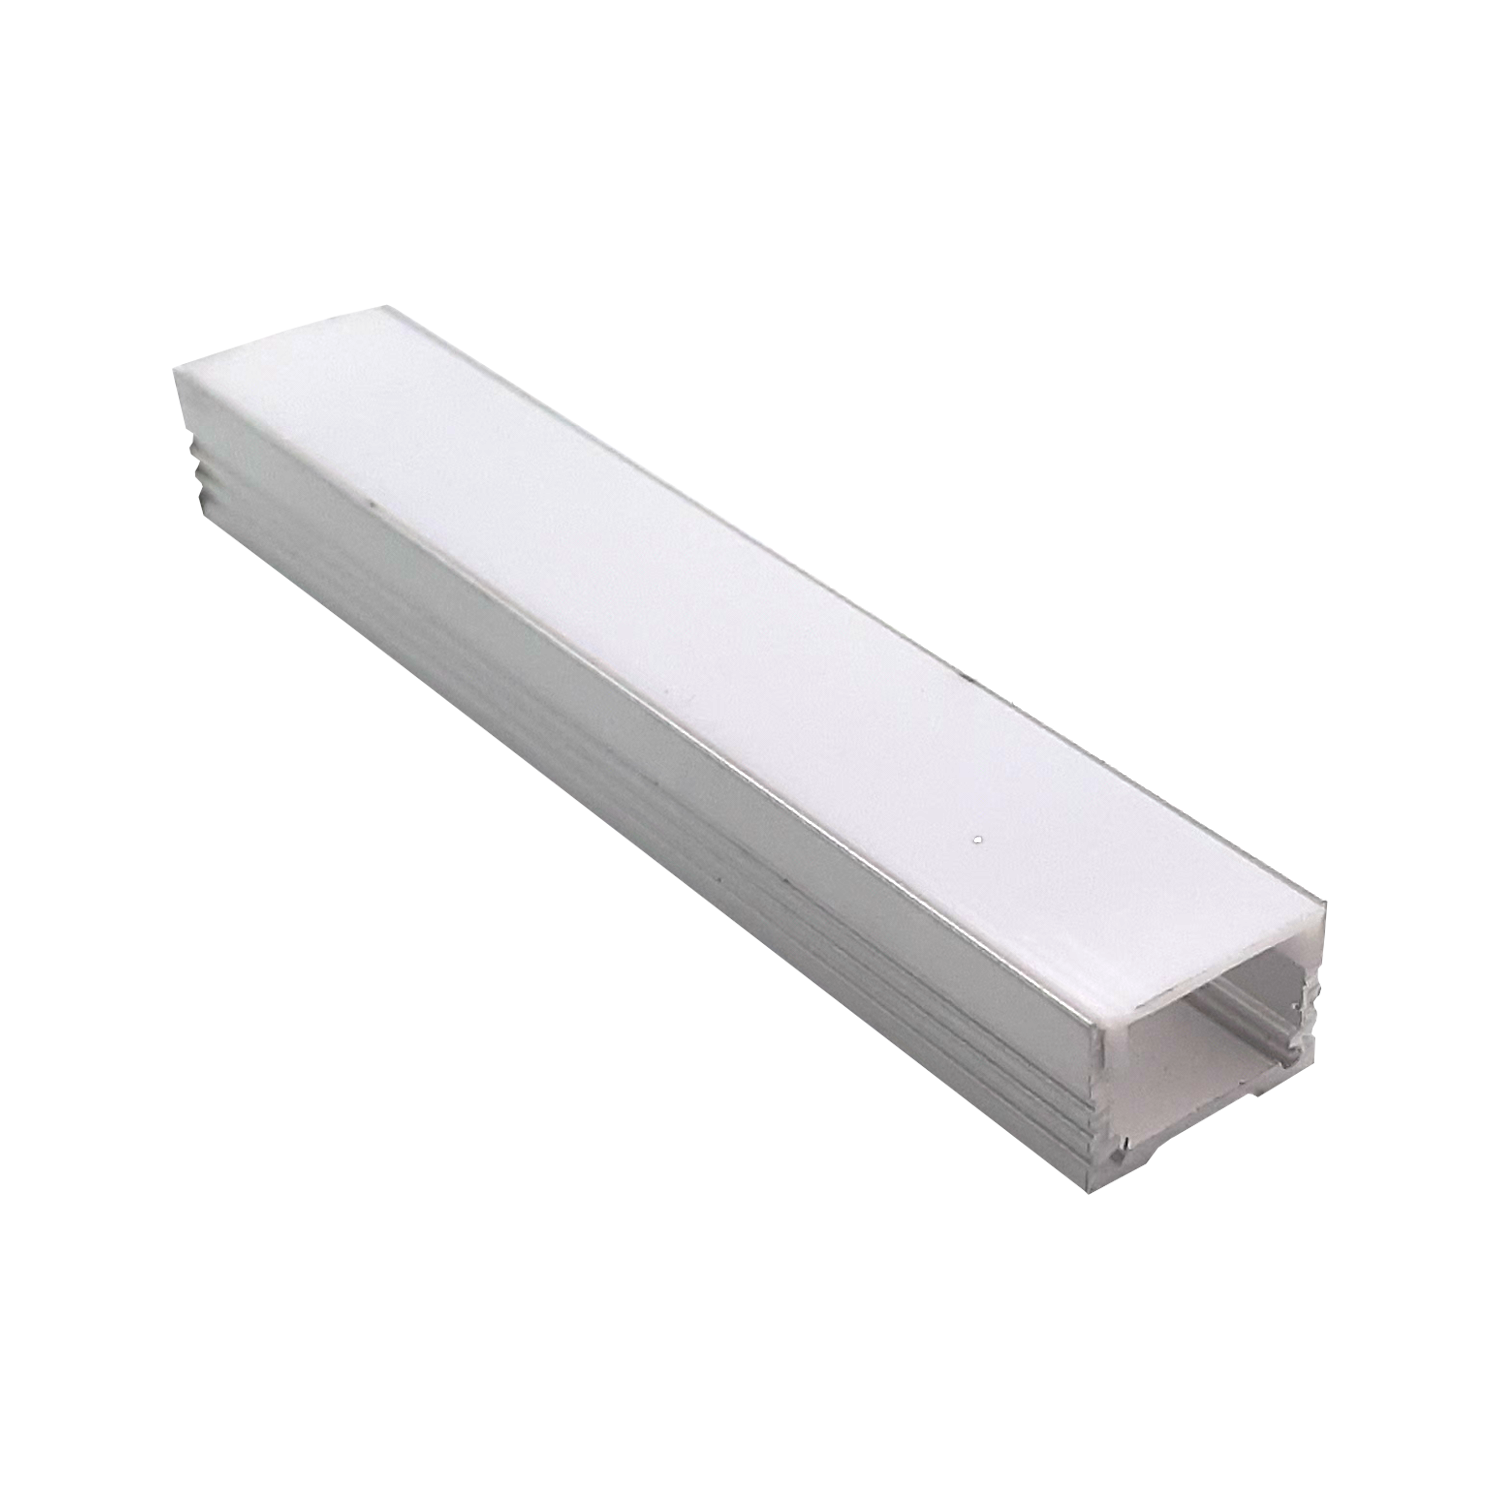 Product image of LXT12 Silver Deep Extrusion for Dot Free LED strip